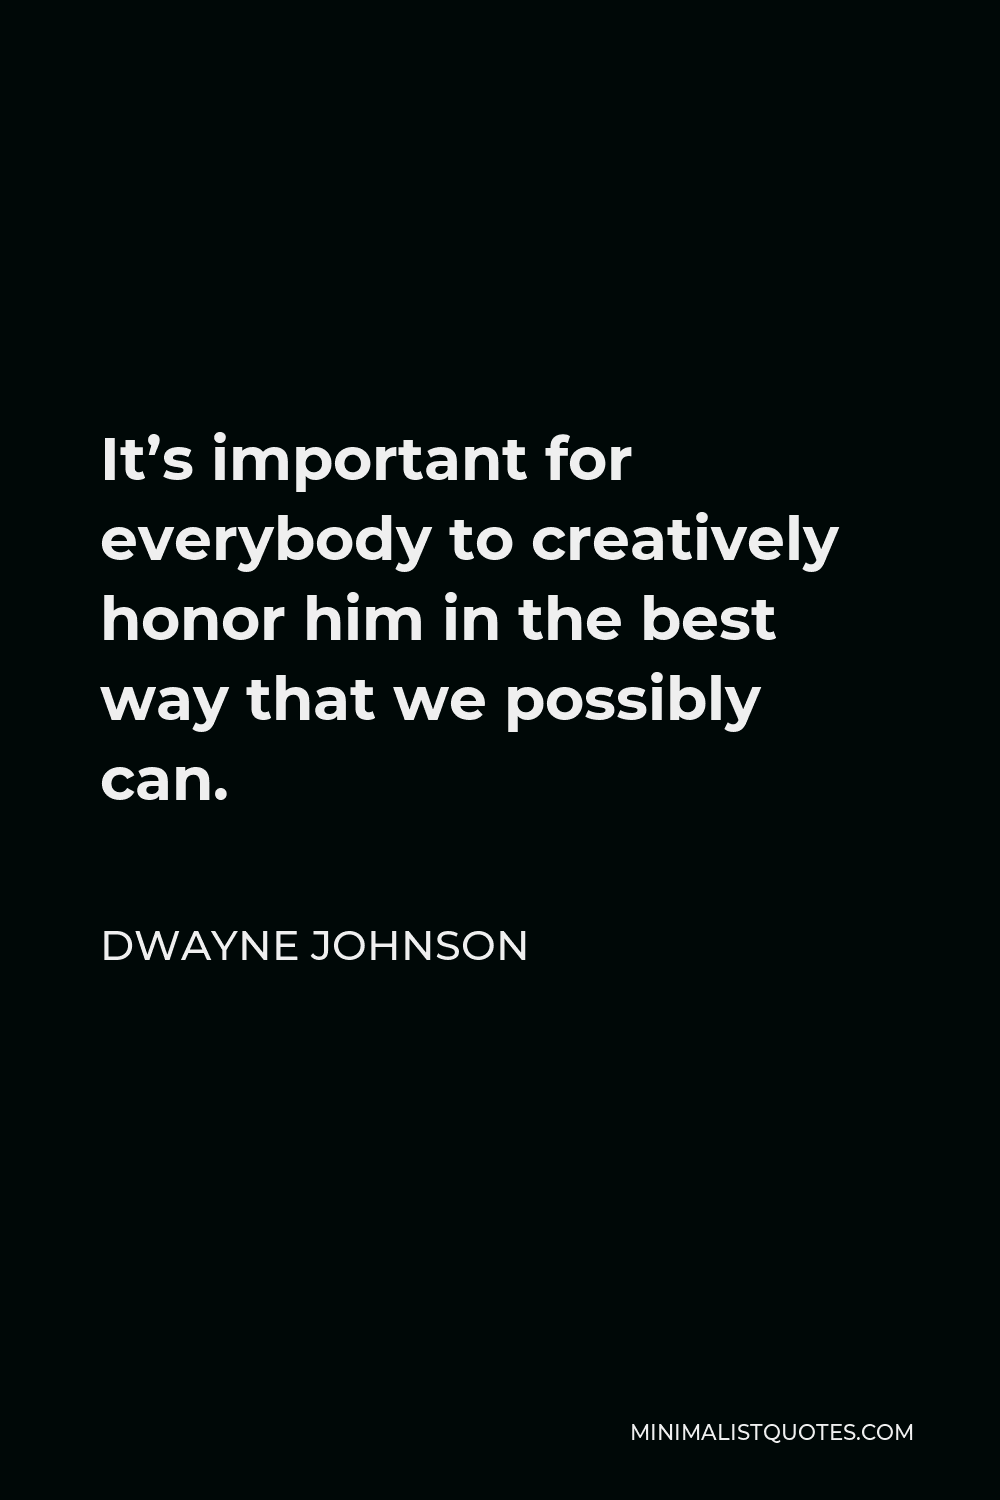 Dwayne Johnson Quote - It’s important for everybody to creatively honor him in the best way that we possibly can.